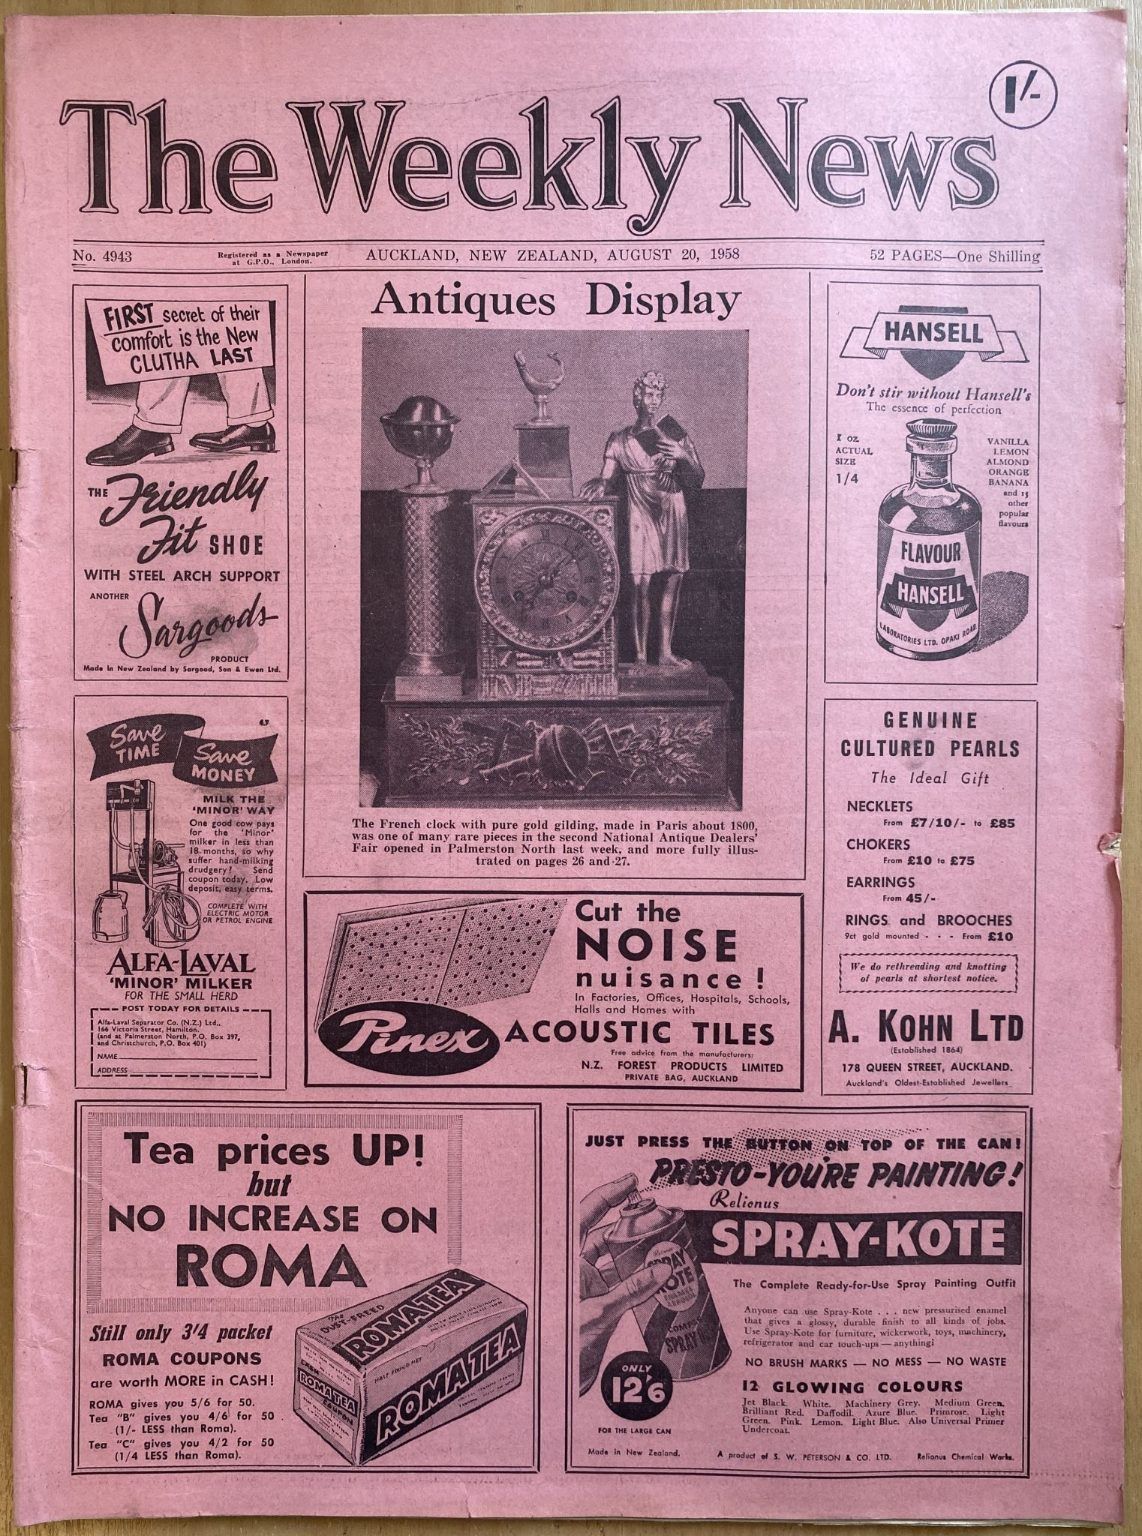 OLD NEWSPAPER: The Weekly News, No. 4943, 20 August 1958